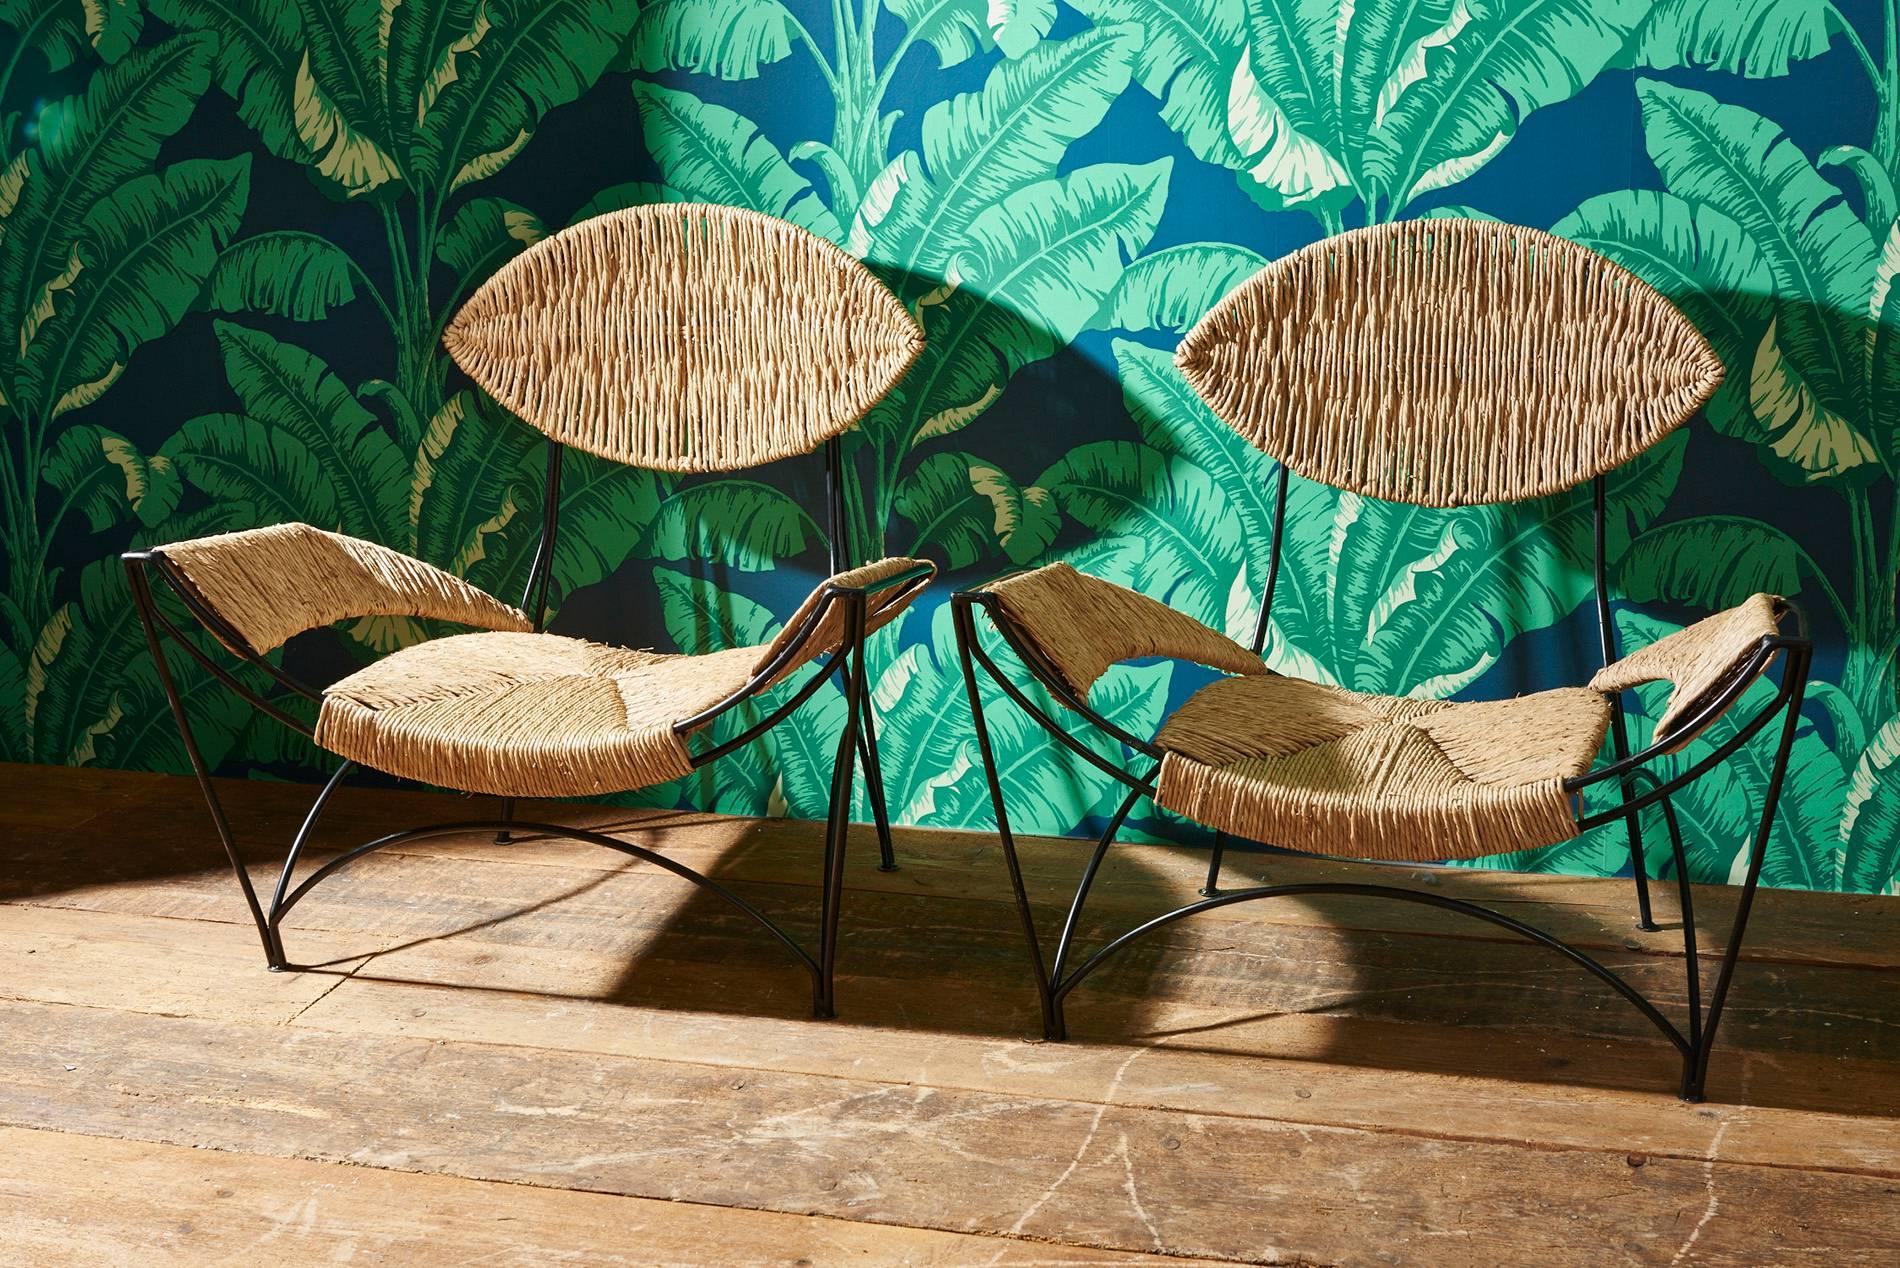 Stunning pair of Tom Dixon (1959) armchairs, "Baby Fat" model. Cappellini edition, wicker and steel, circa 1991, Italy. Measure: Height 90 cm, width 92 cm, seat depth 35 cm, depth 64 cm. In very good condition.